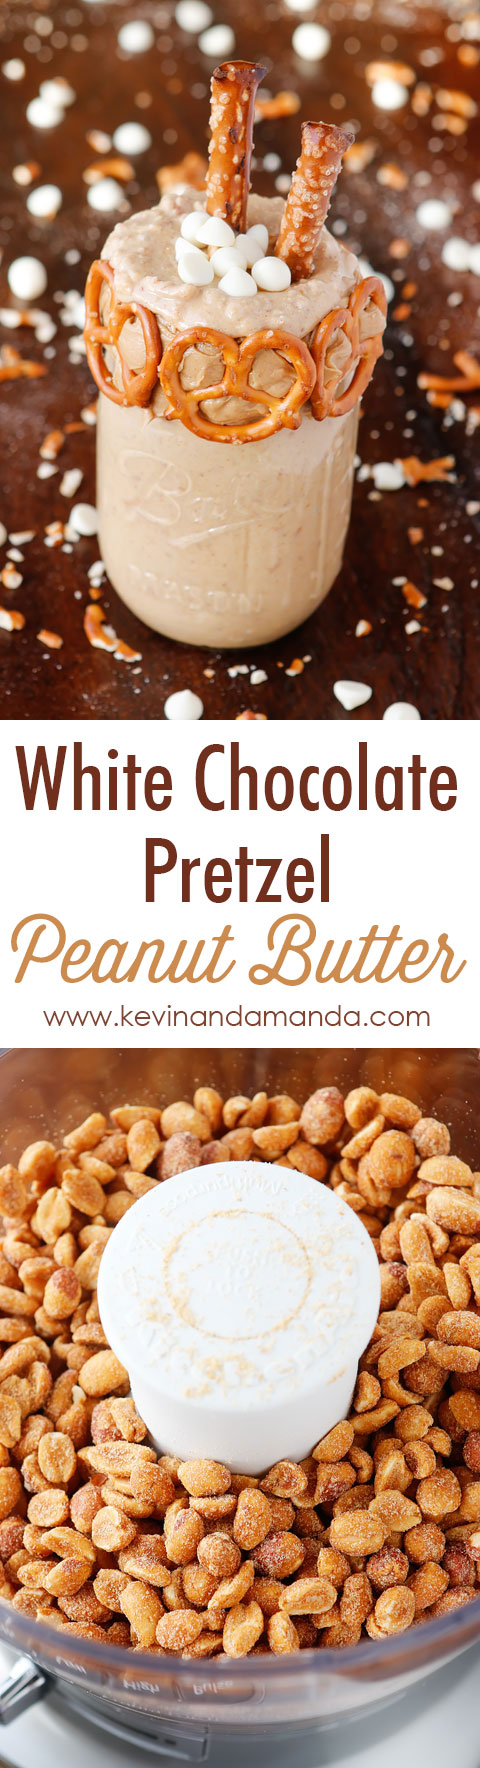 White Chocolate Pretzel Peanut Butter. This is literally the BEST thing I have EVER tasted!!!